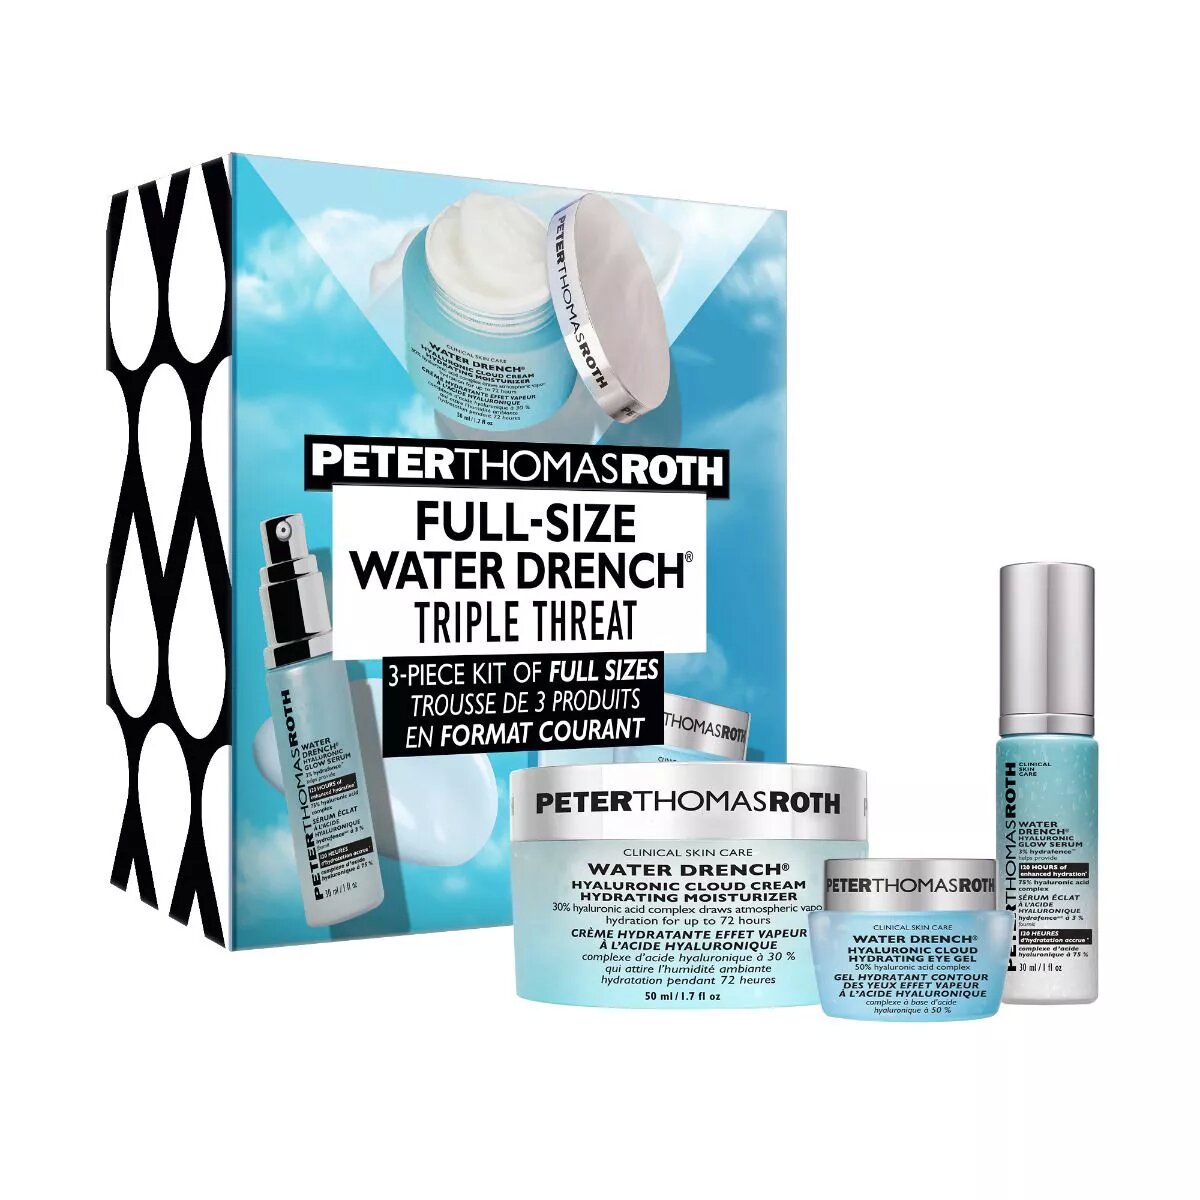 Peter Thomas Roth Full-Size Water Drench Triple Threat 3-Piece Kit - New , Sealed, in the Box